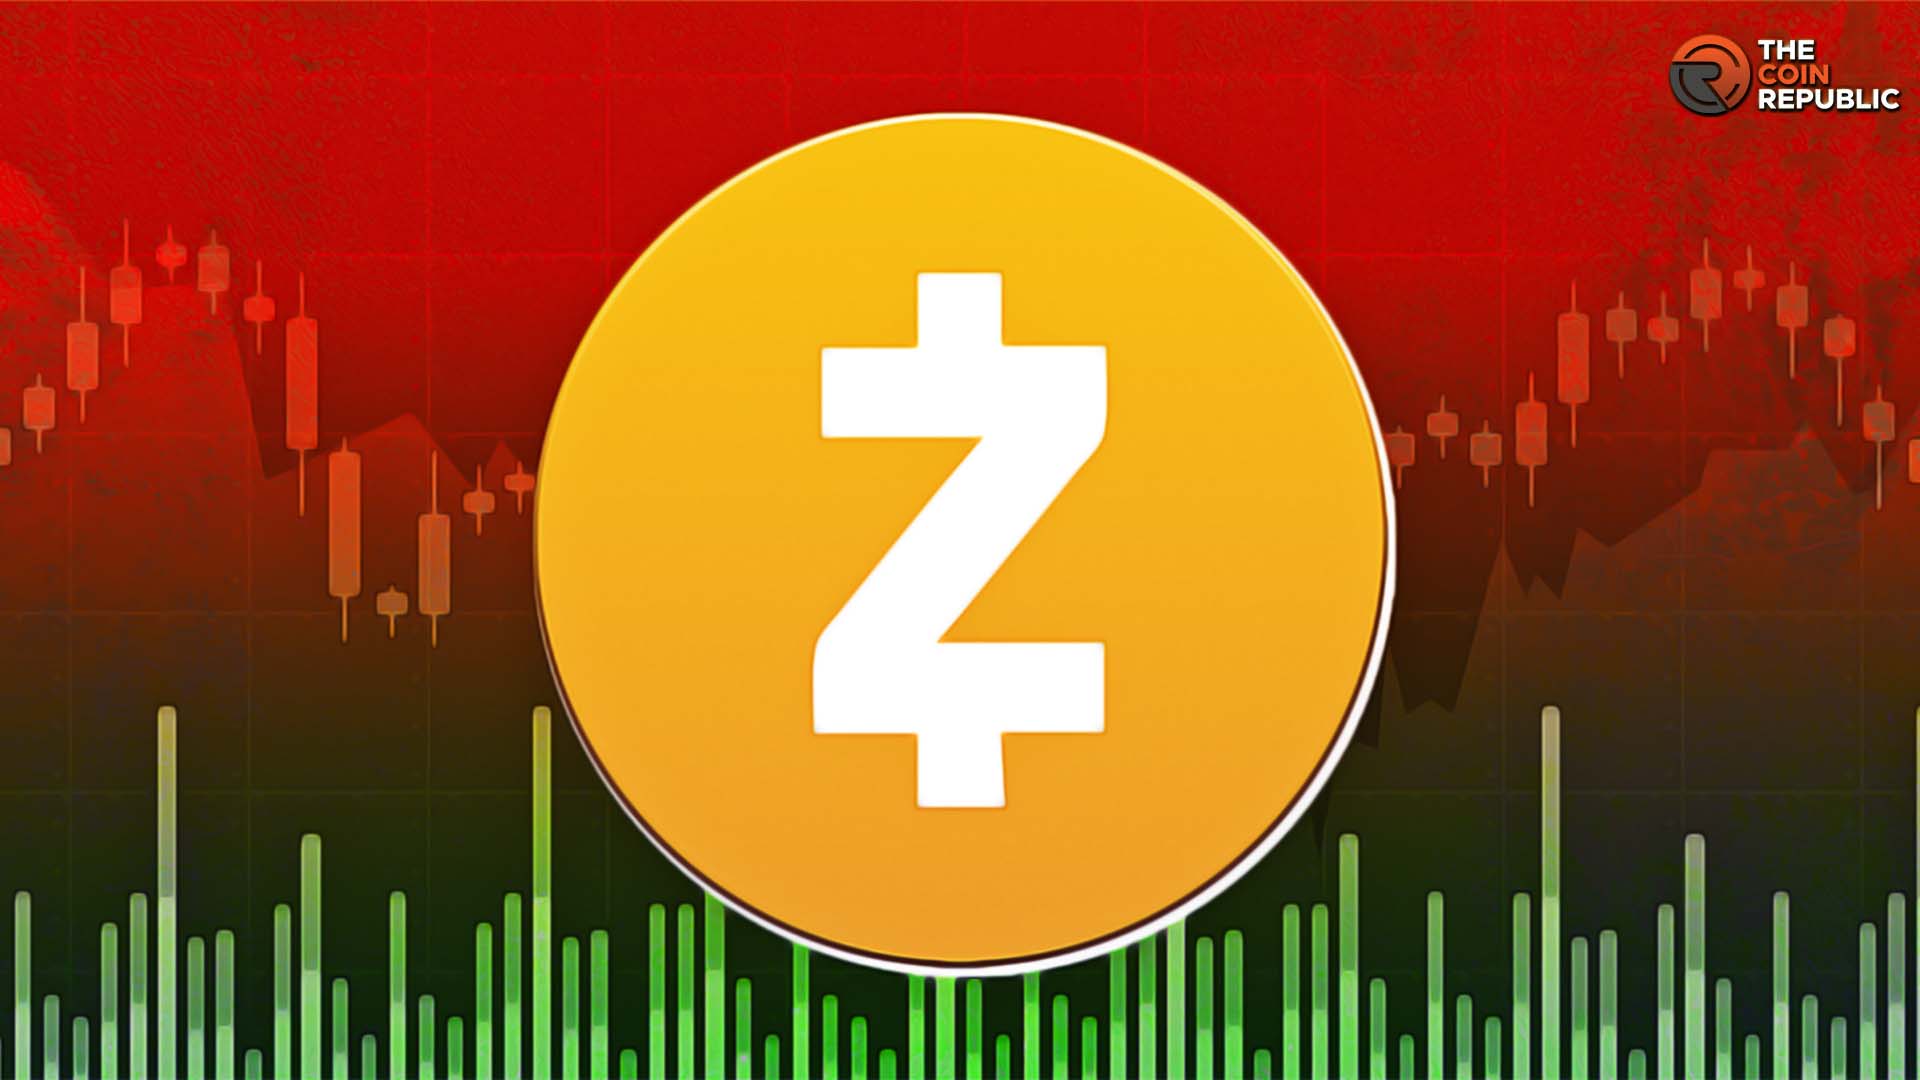 Zcash Price Prediction: Is Zcash Better than Bitcoin?